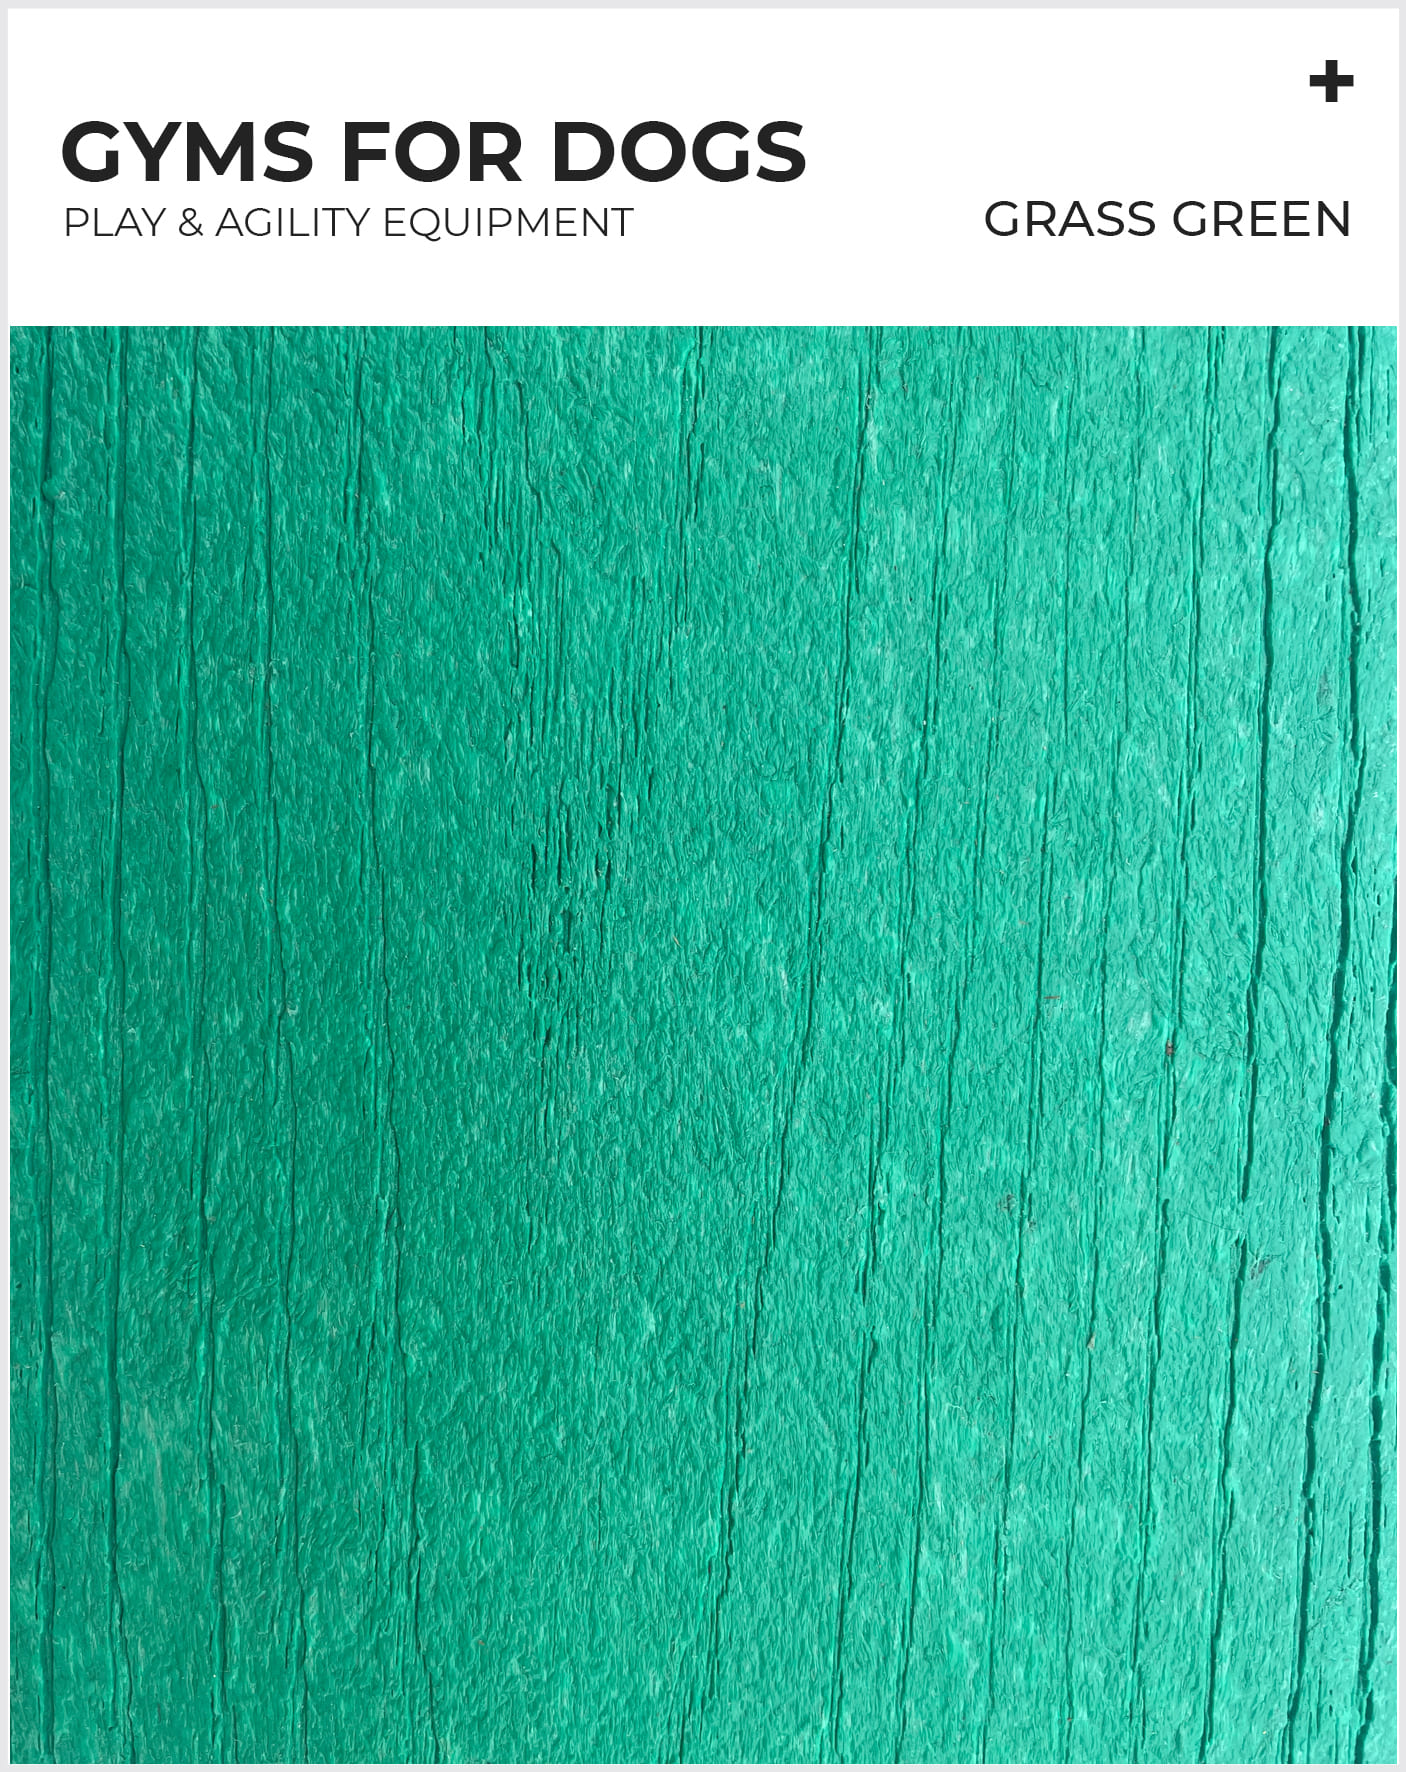 Dog Park Equipment Agility Products - Grass Green